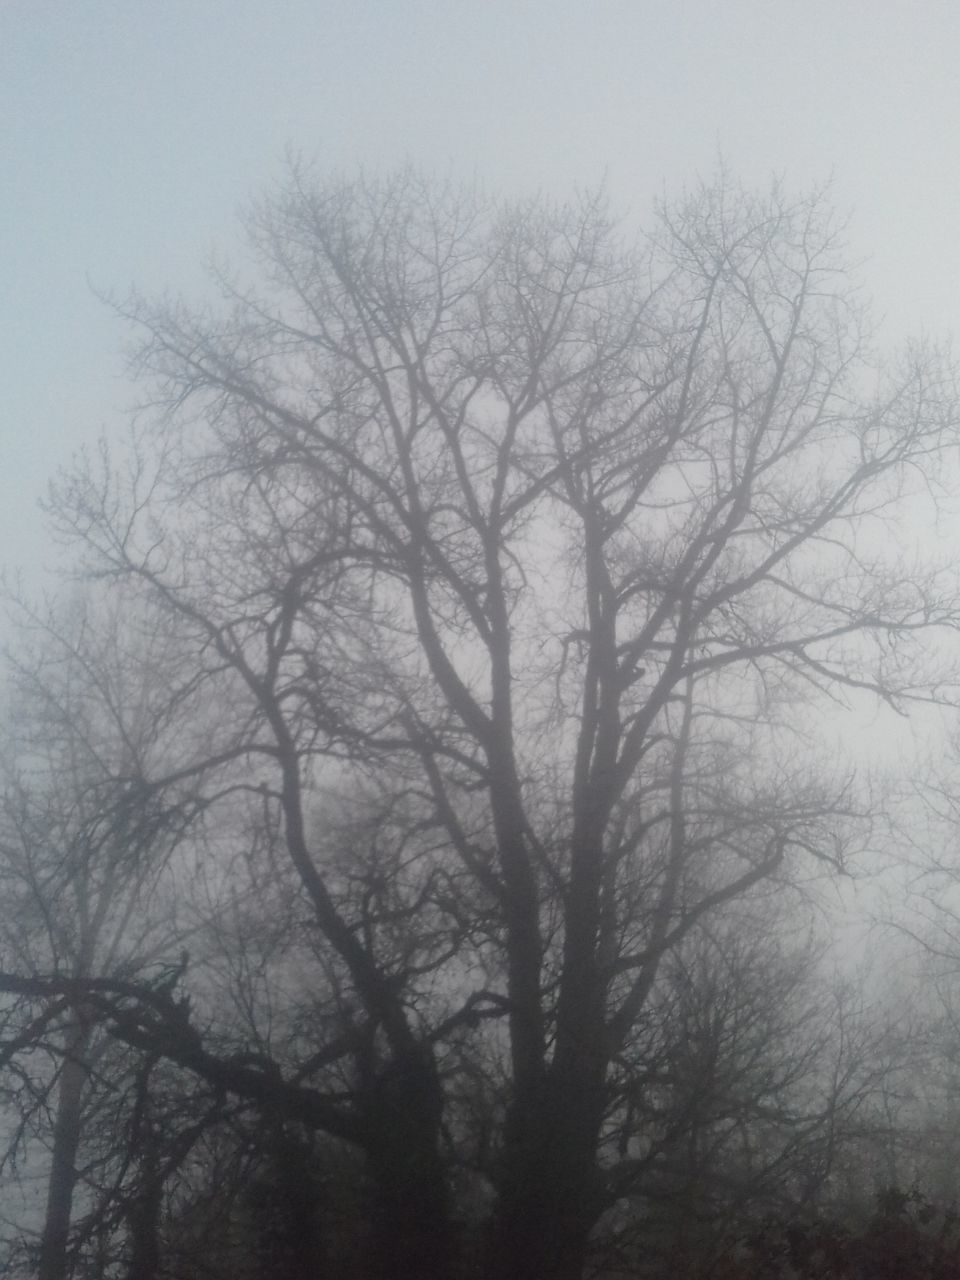 tree, bare tree, tranquility, nature, beauty in nature, outdoors, no people, branch, tranquil scene, day, fog, scenics, sky